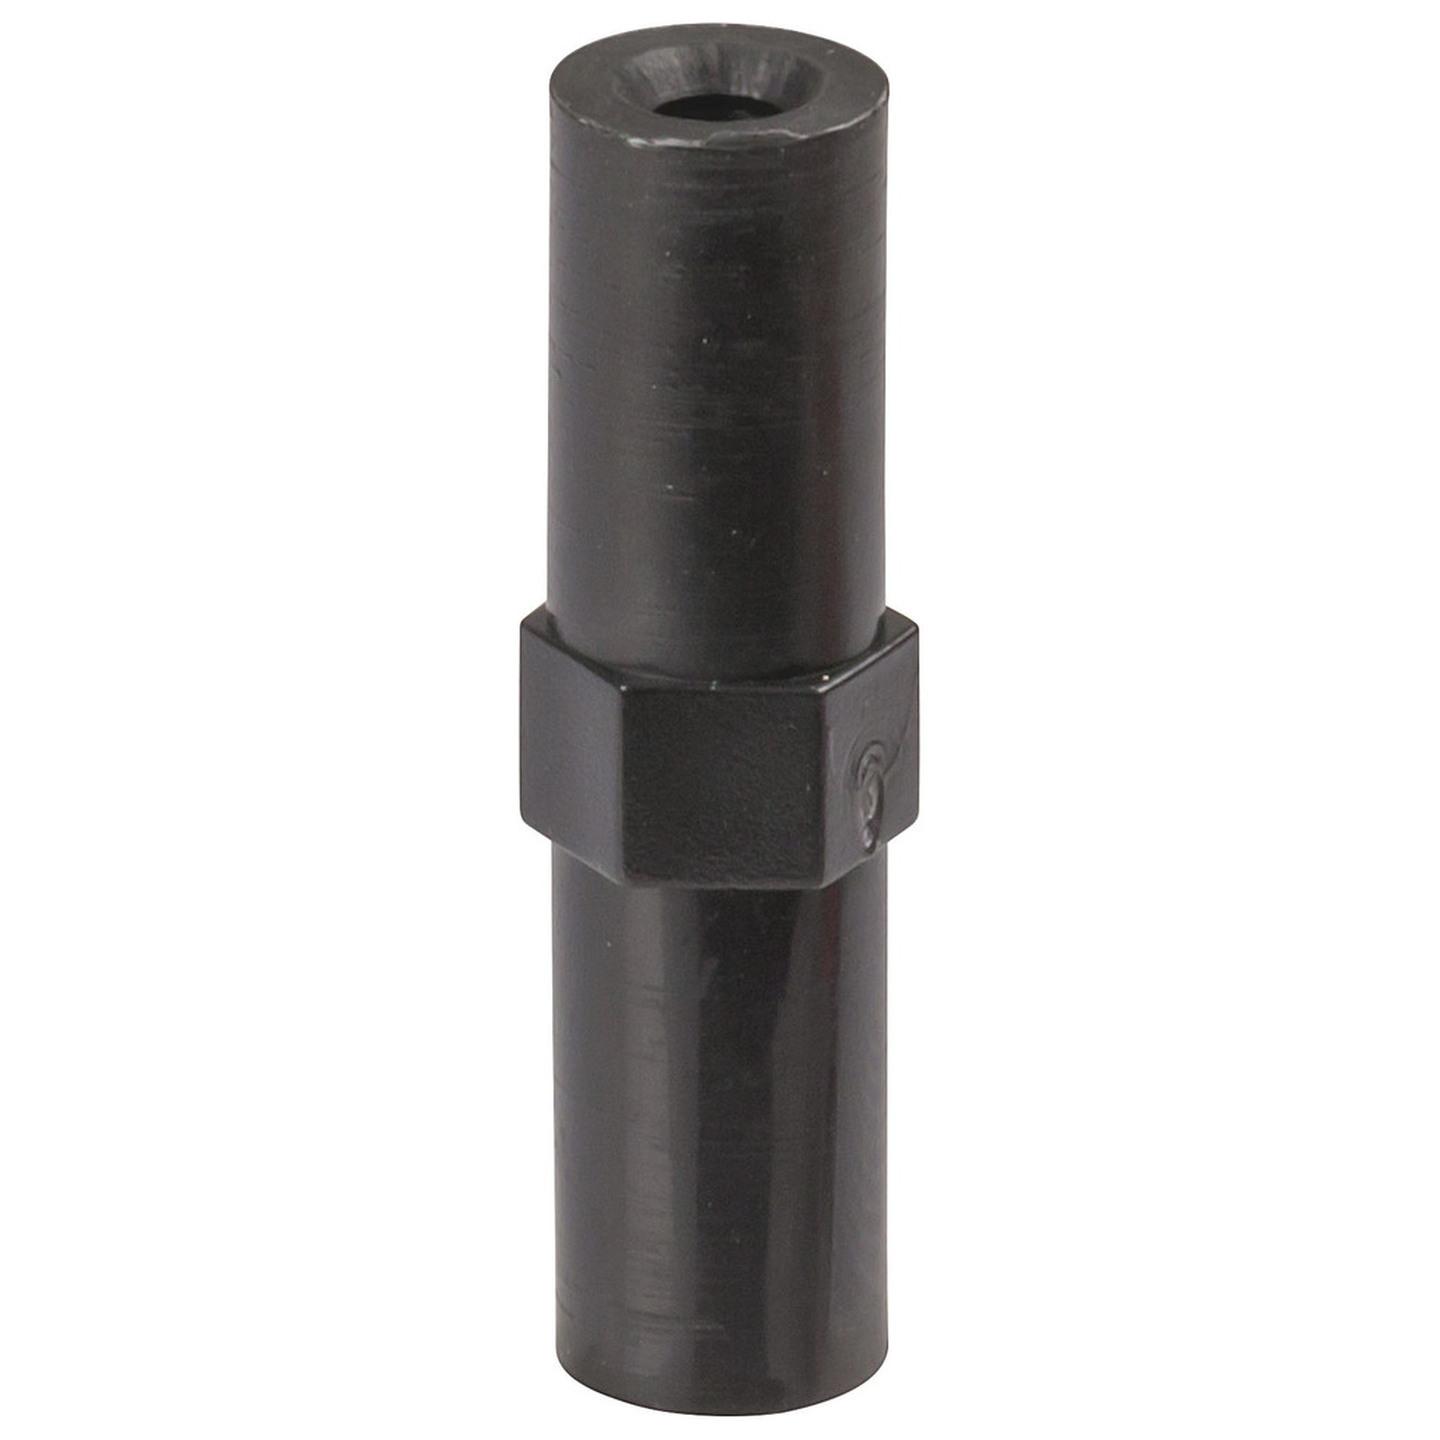 32mm Nylon PCB Spacers - Pack of 4